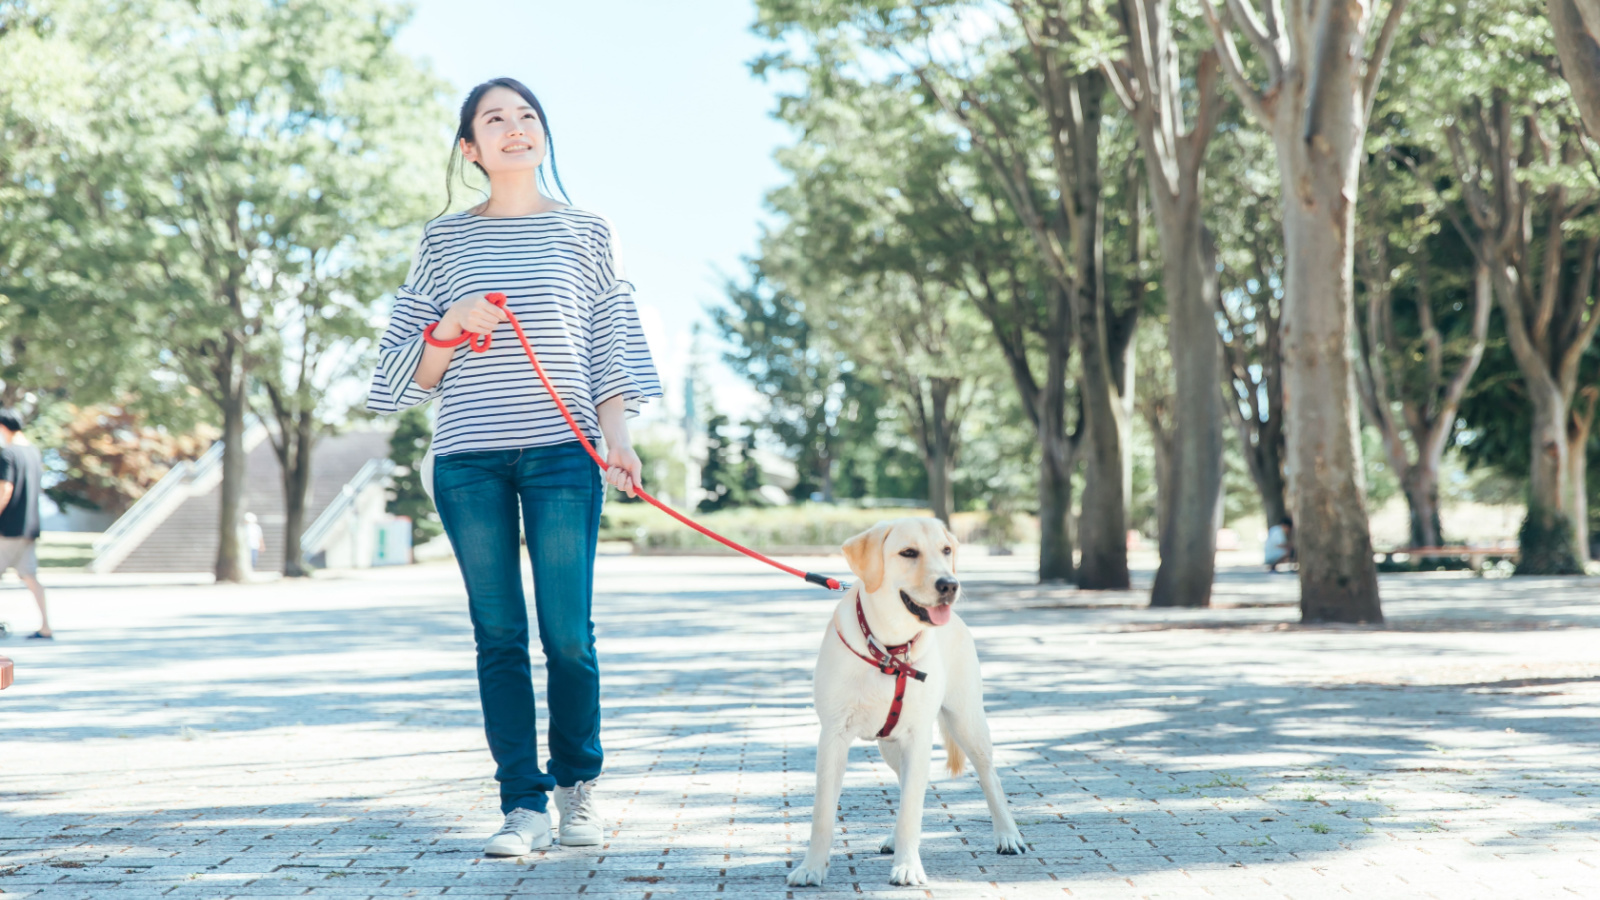 image credit: buritora/shutterstock <p><span>Offering pet care services like dog walking, pet sitting, or grooming can be both enjoyable and profitable for animal-loving teens. This provides a flexible source of income and nurtures empathy and responsibility. It’s a caring and fun way to contribute to their college expenses.</span></p>